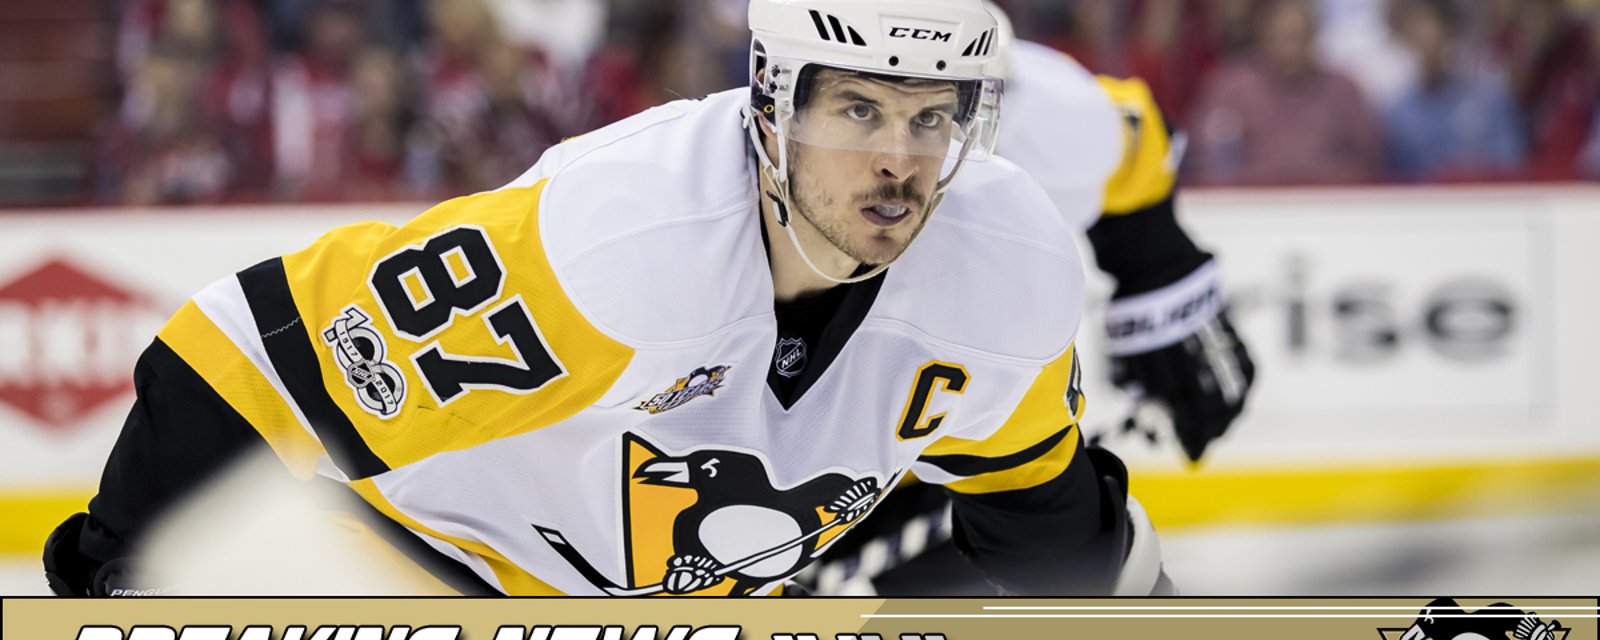 BREAKING: Crucial details emerge on Sidney Crosby following the morning skate.